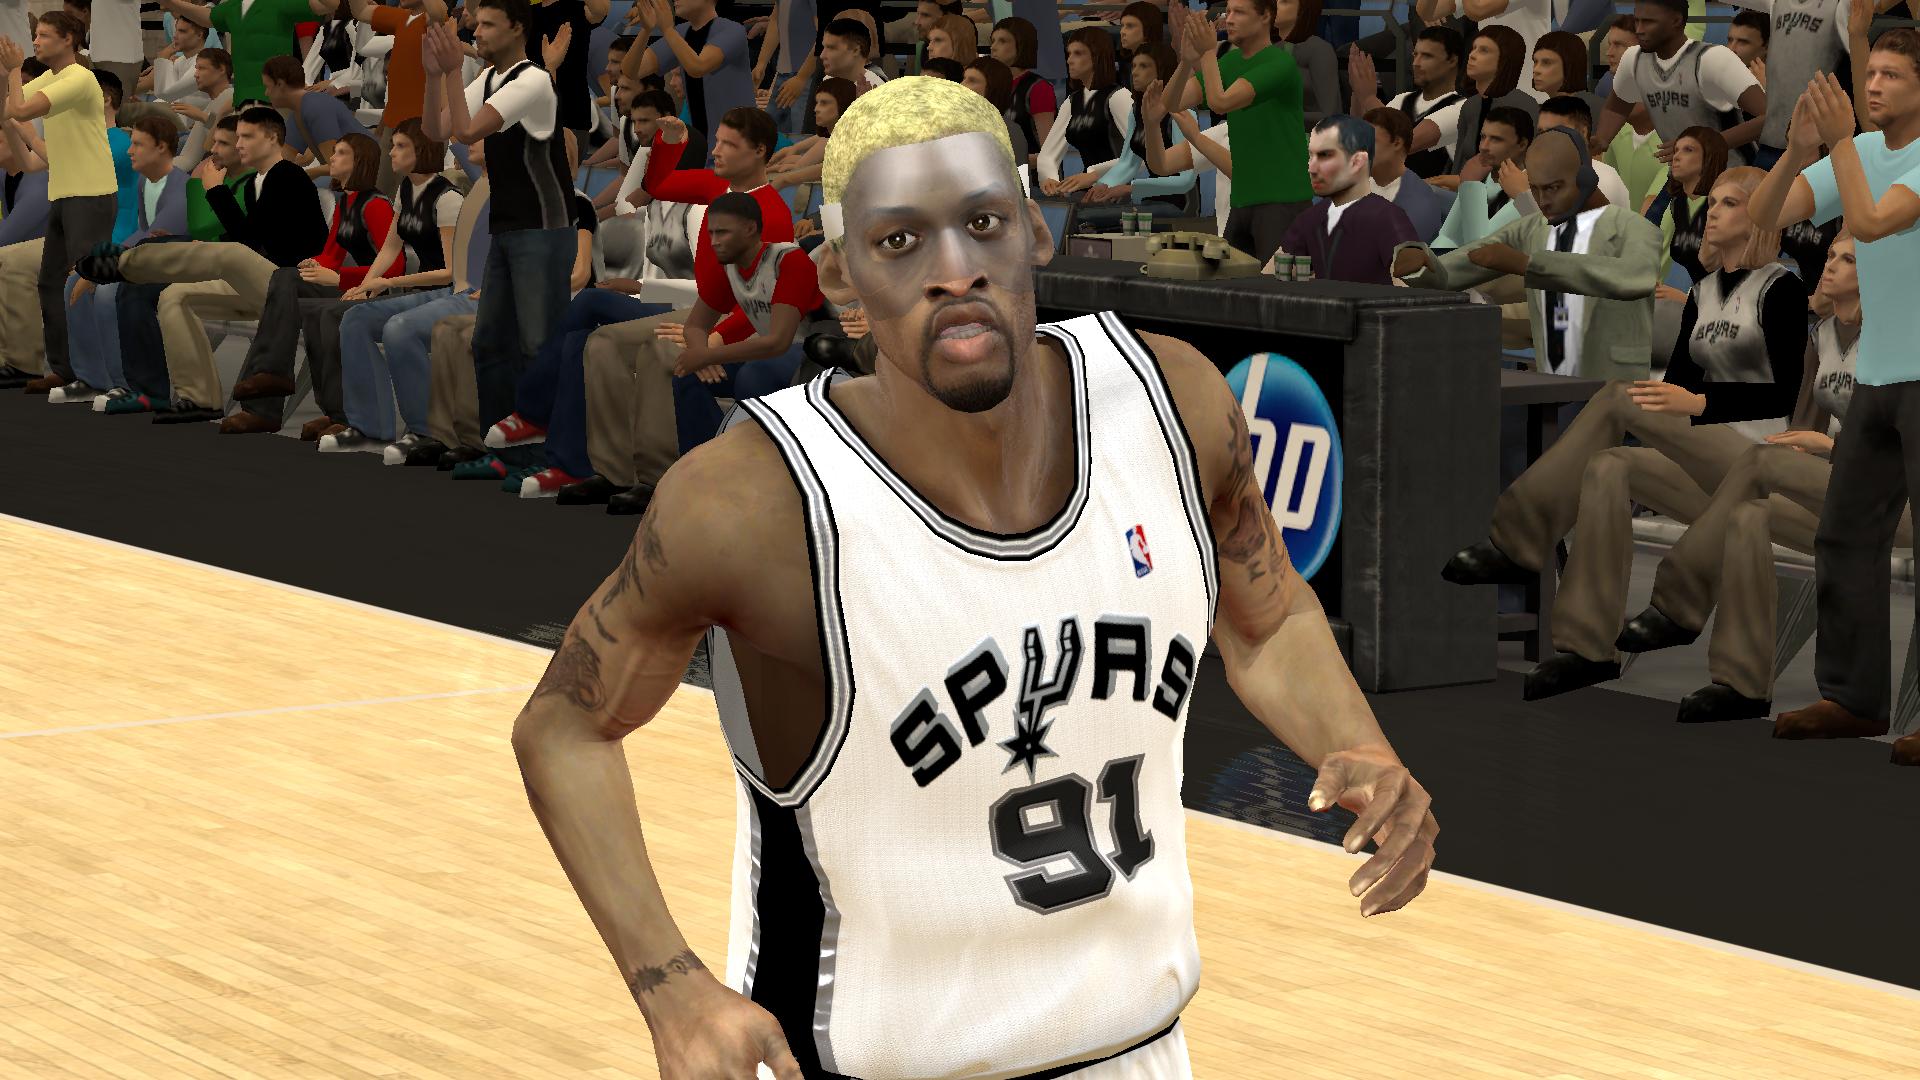 NLSC Forum • NBA LIVE '95 RELEASED ON PAGE 1! NBA ON NBC GLOBAL RELEASED!